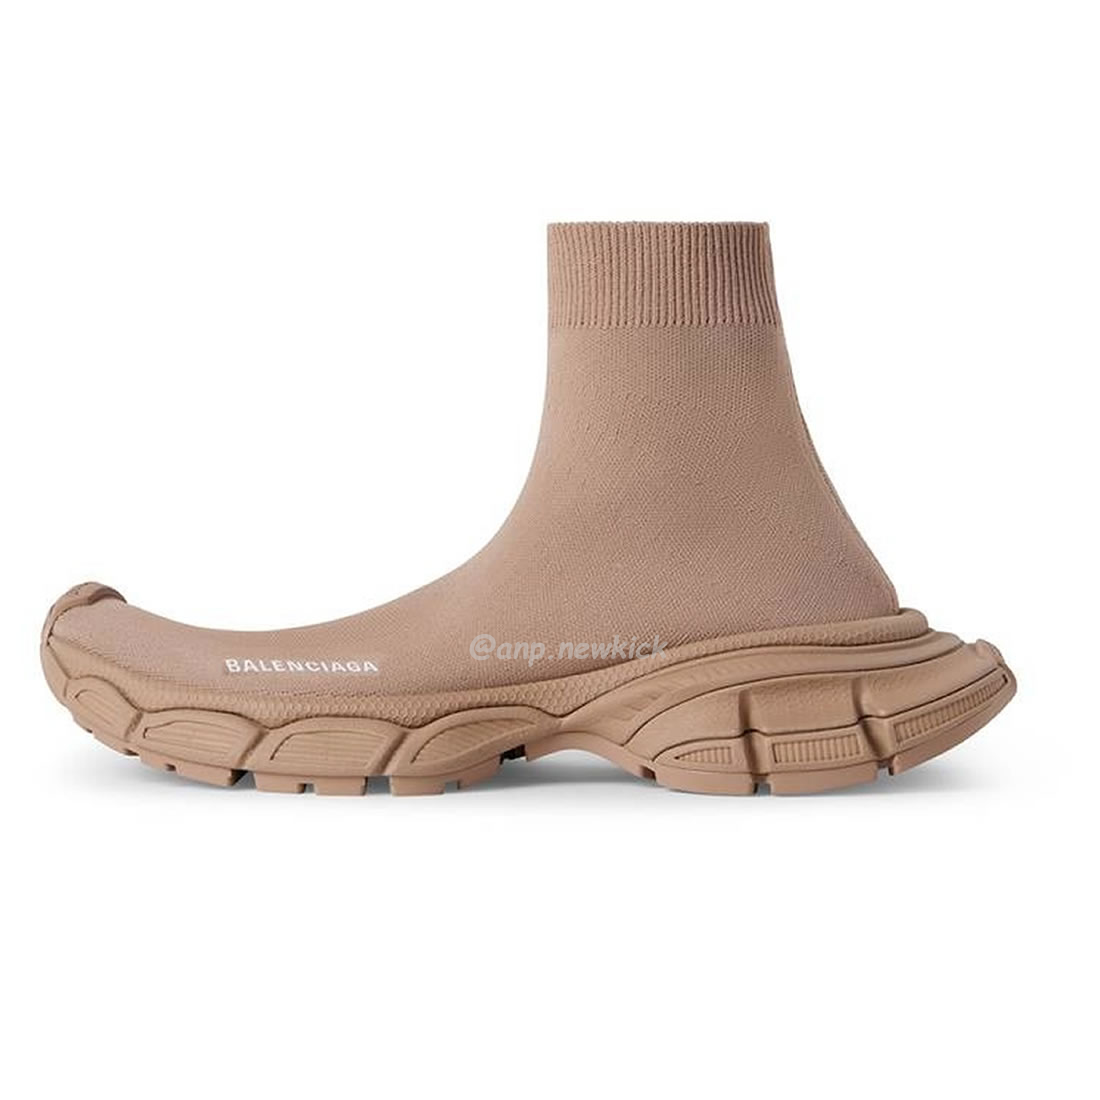 Balenciaga 3xl Sock Recycled Knit Sneakers Black White Fluo Yellow Beige (15) - newkick.org